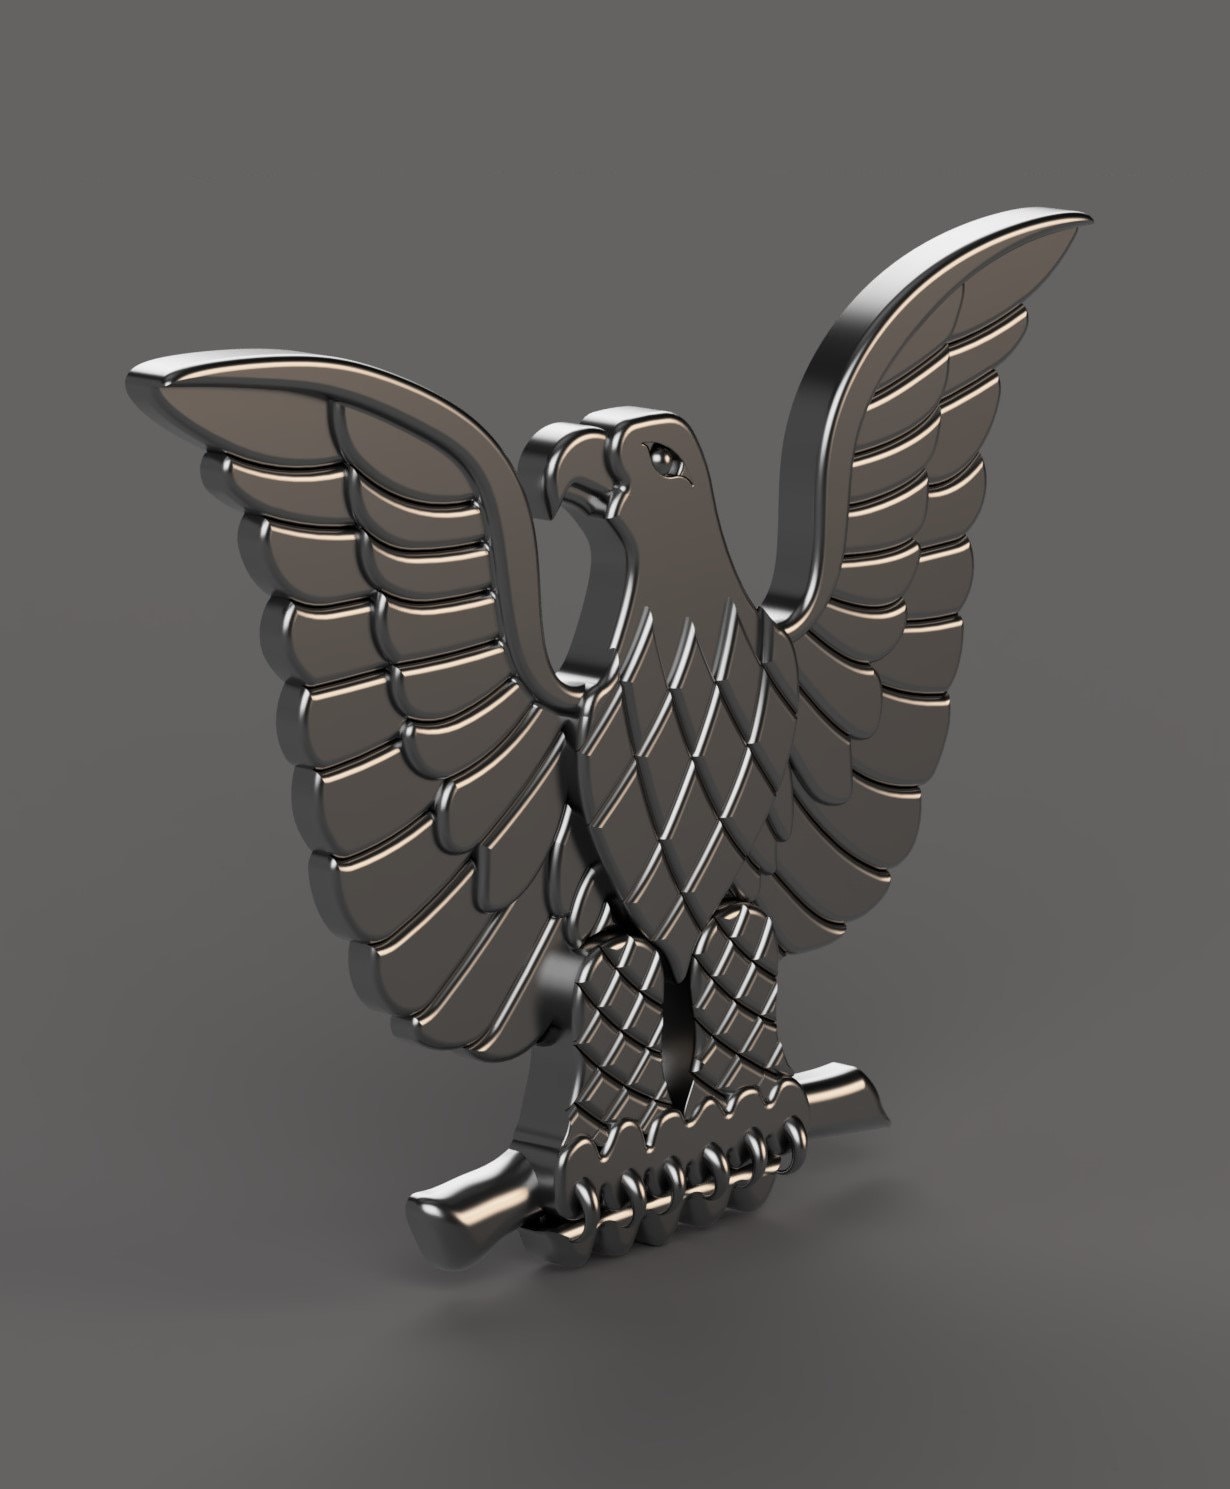 Navy Petty Officer perched eagle insignia 3D stl file for CNC router